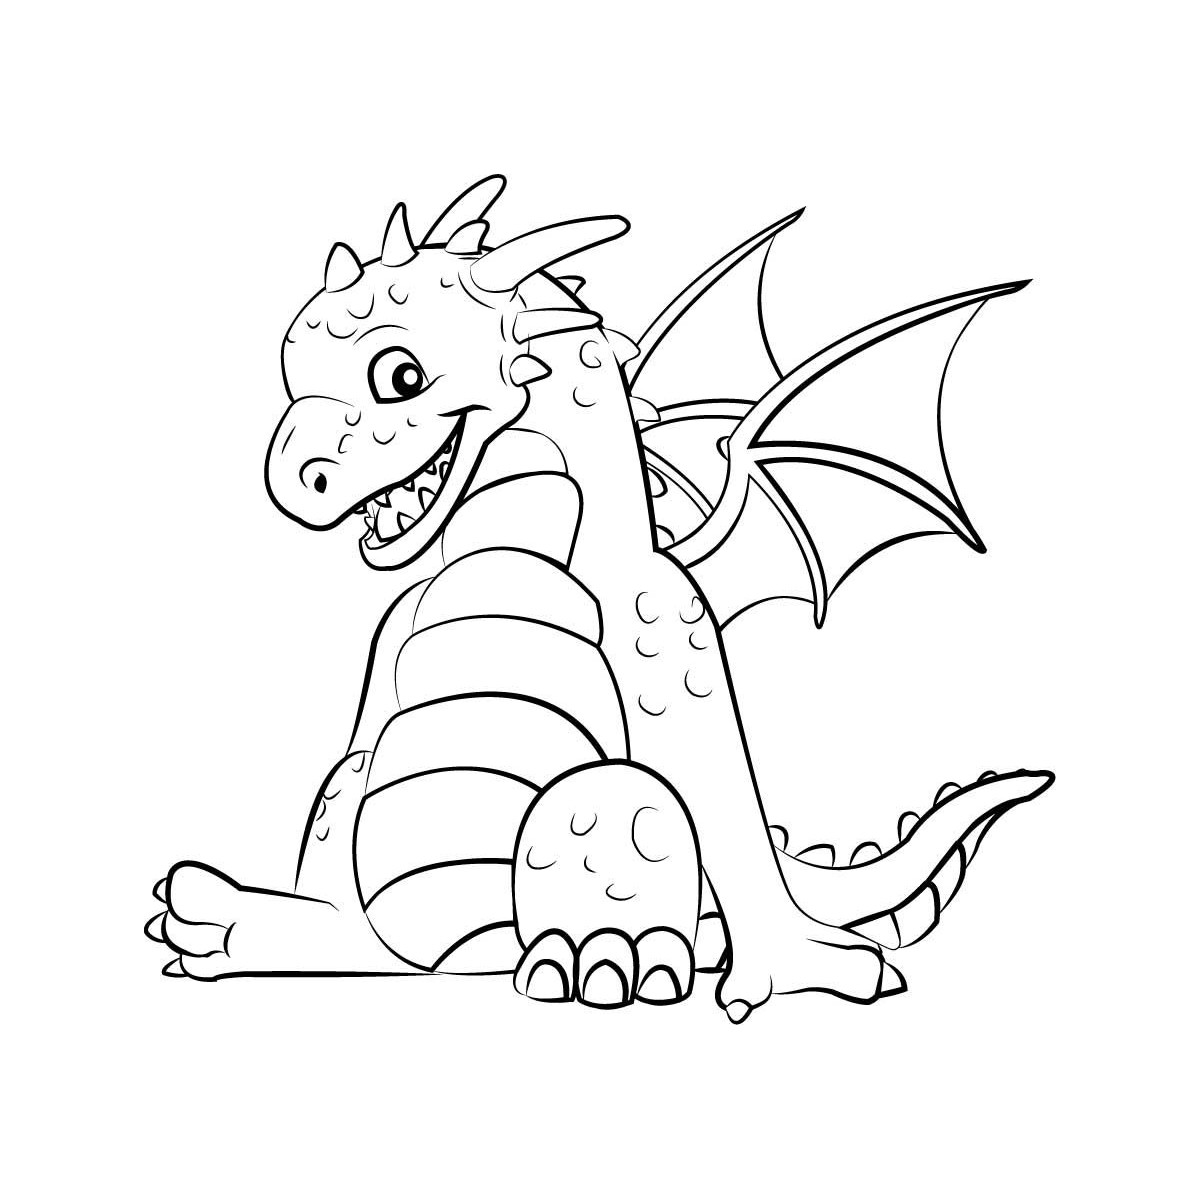 Coloring Pages For Kids Dragon
 Dragon Coloring Pages